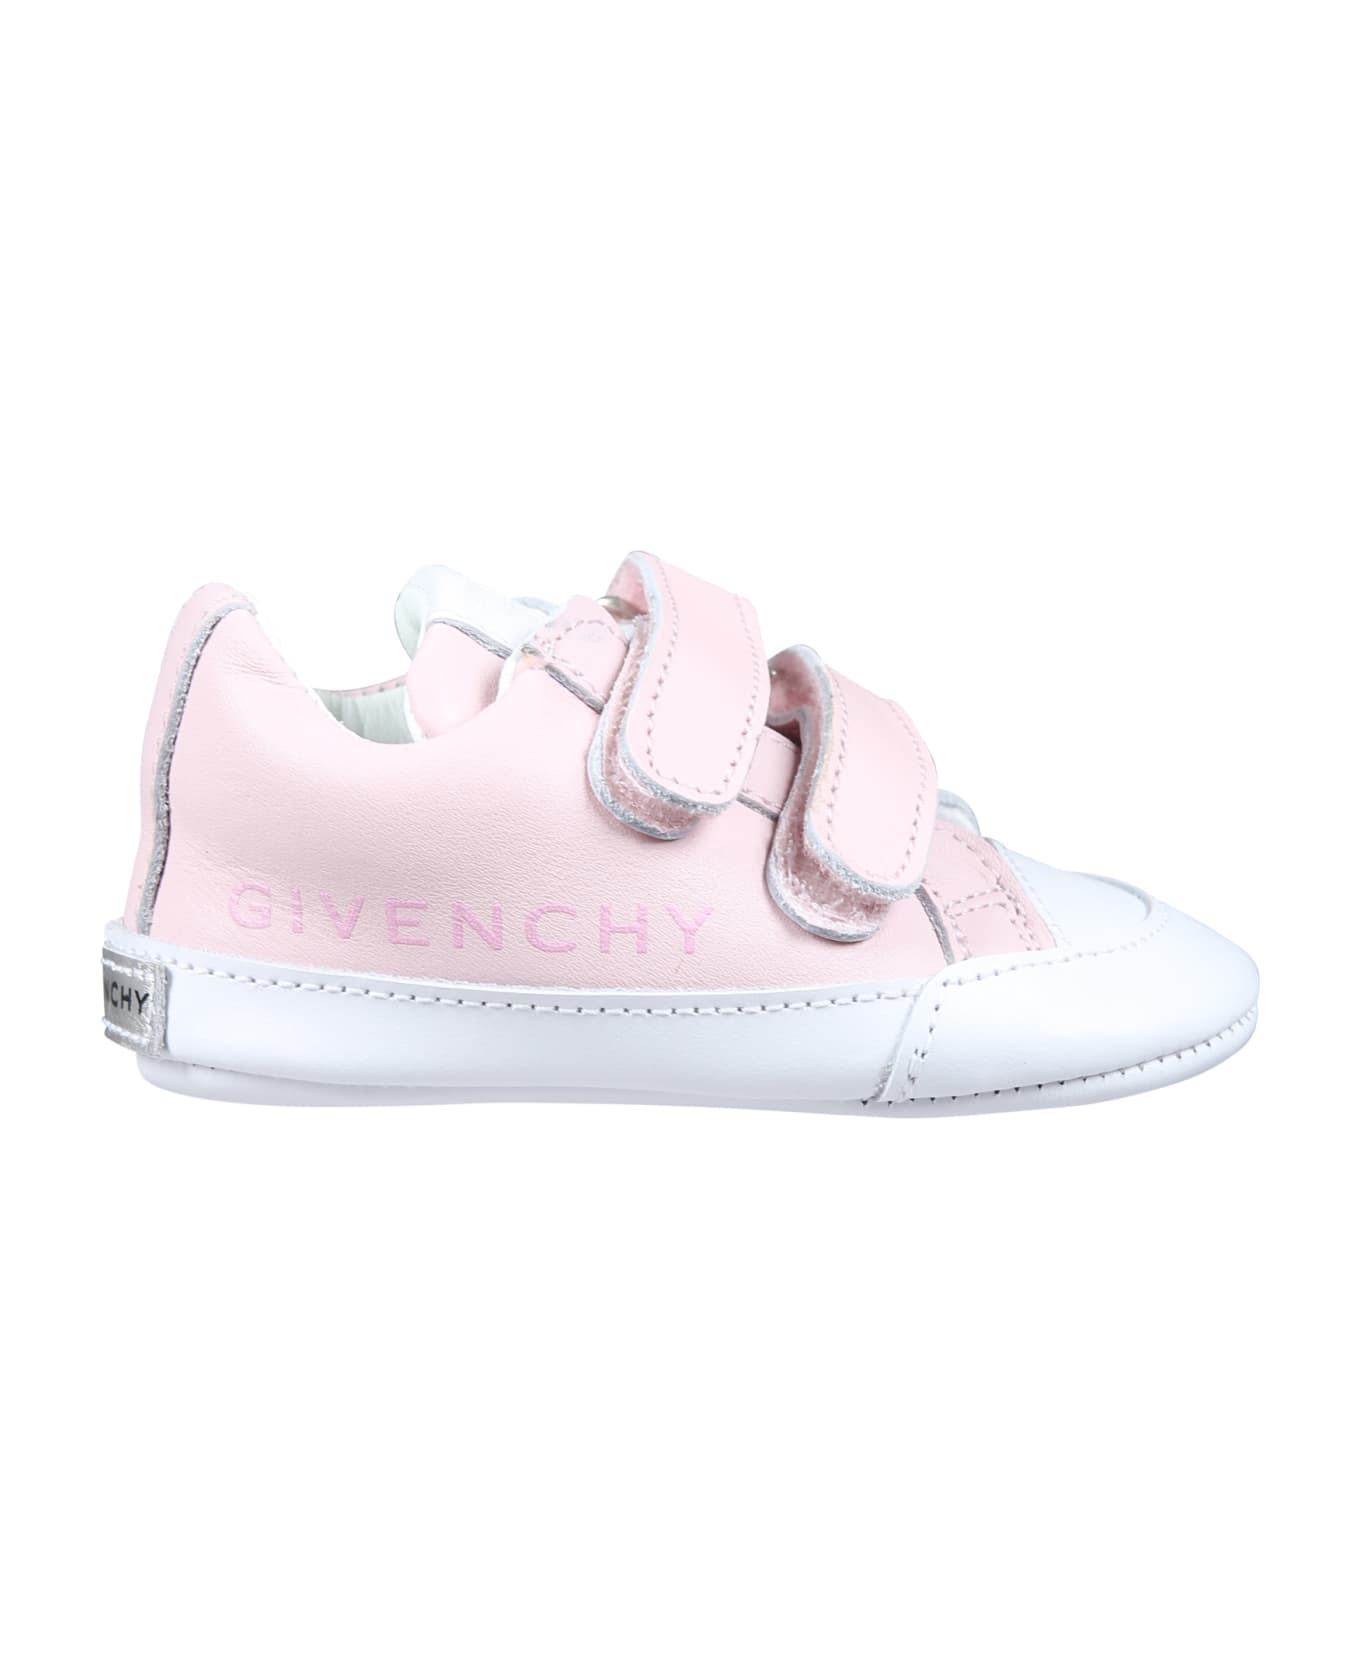 Givenchy Pink Sneakers For Baby Girl With Logo - Pink シューズ